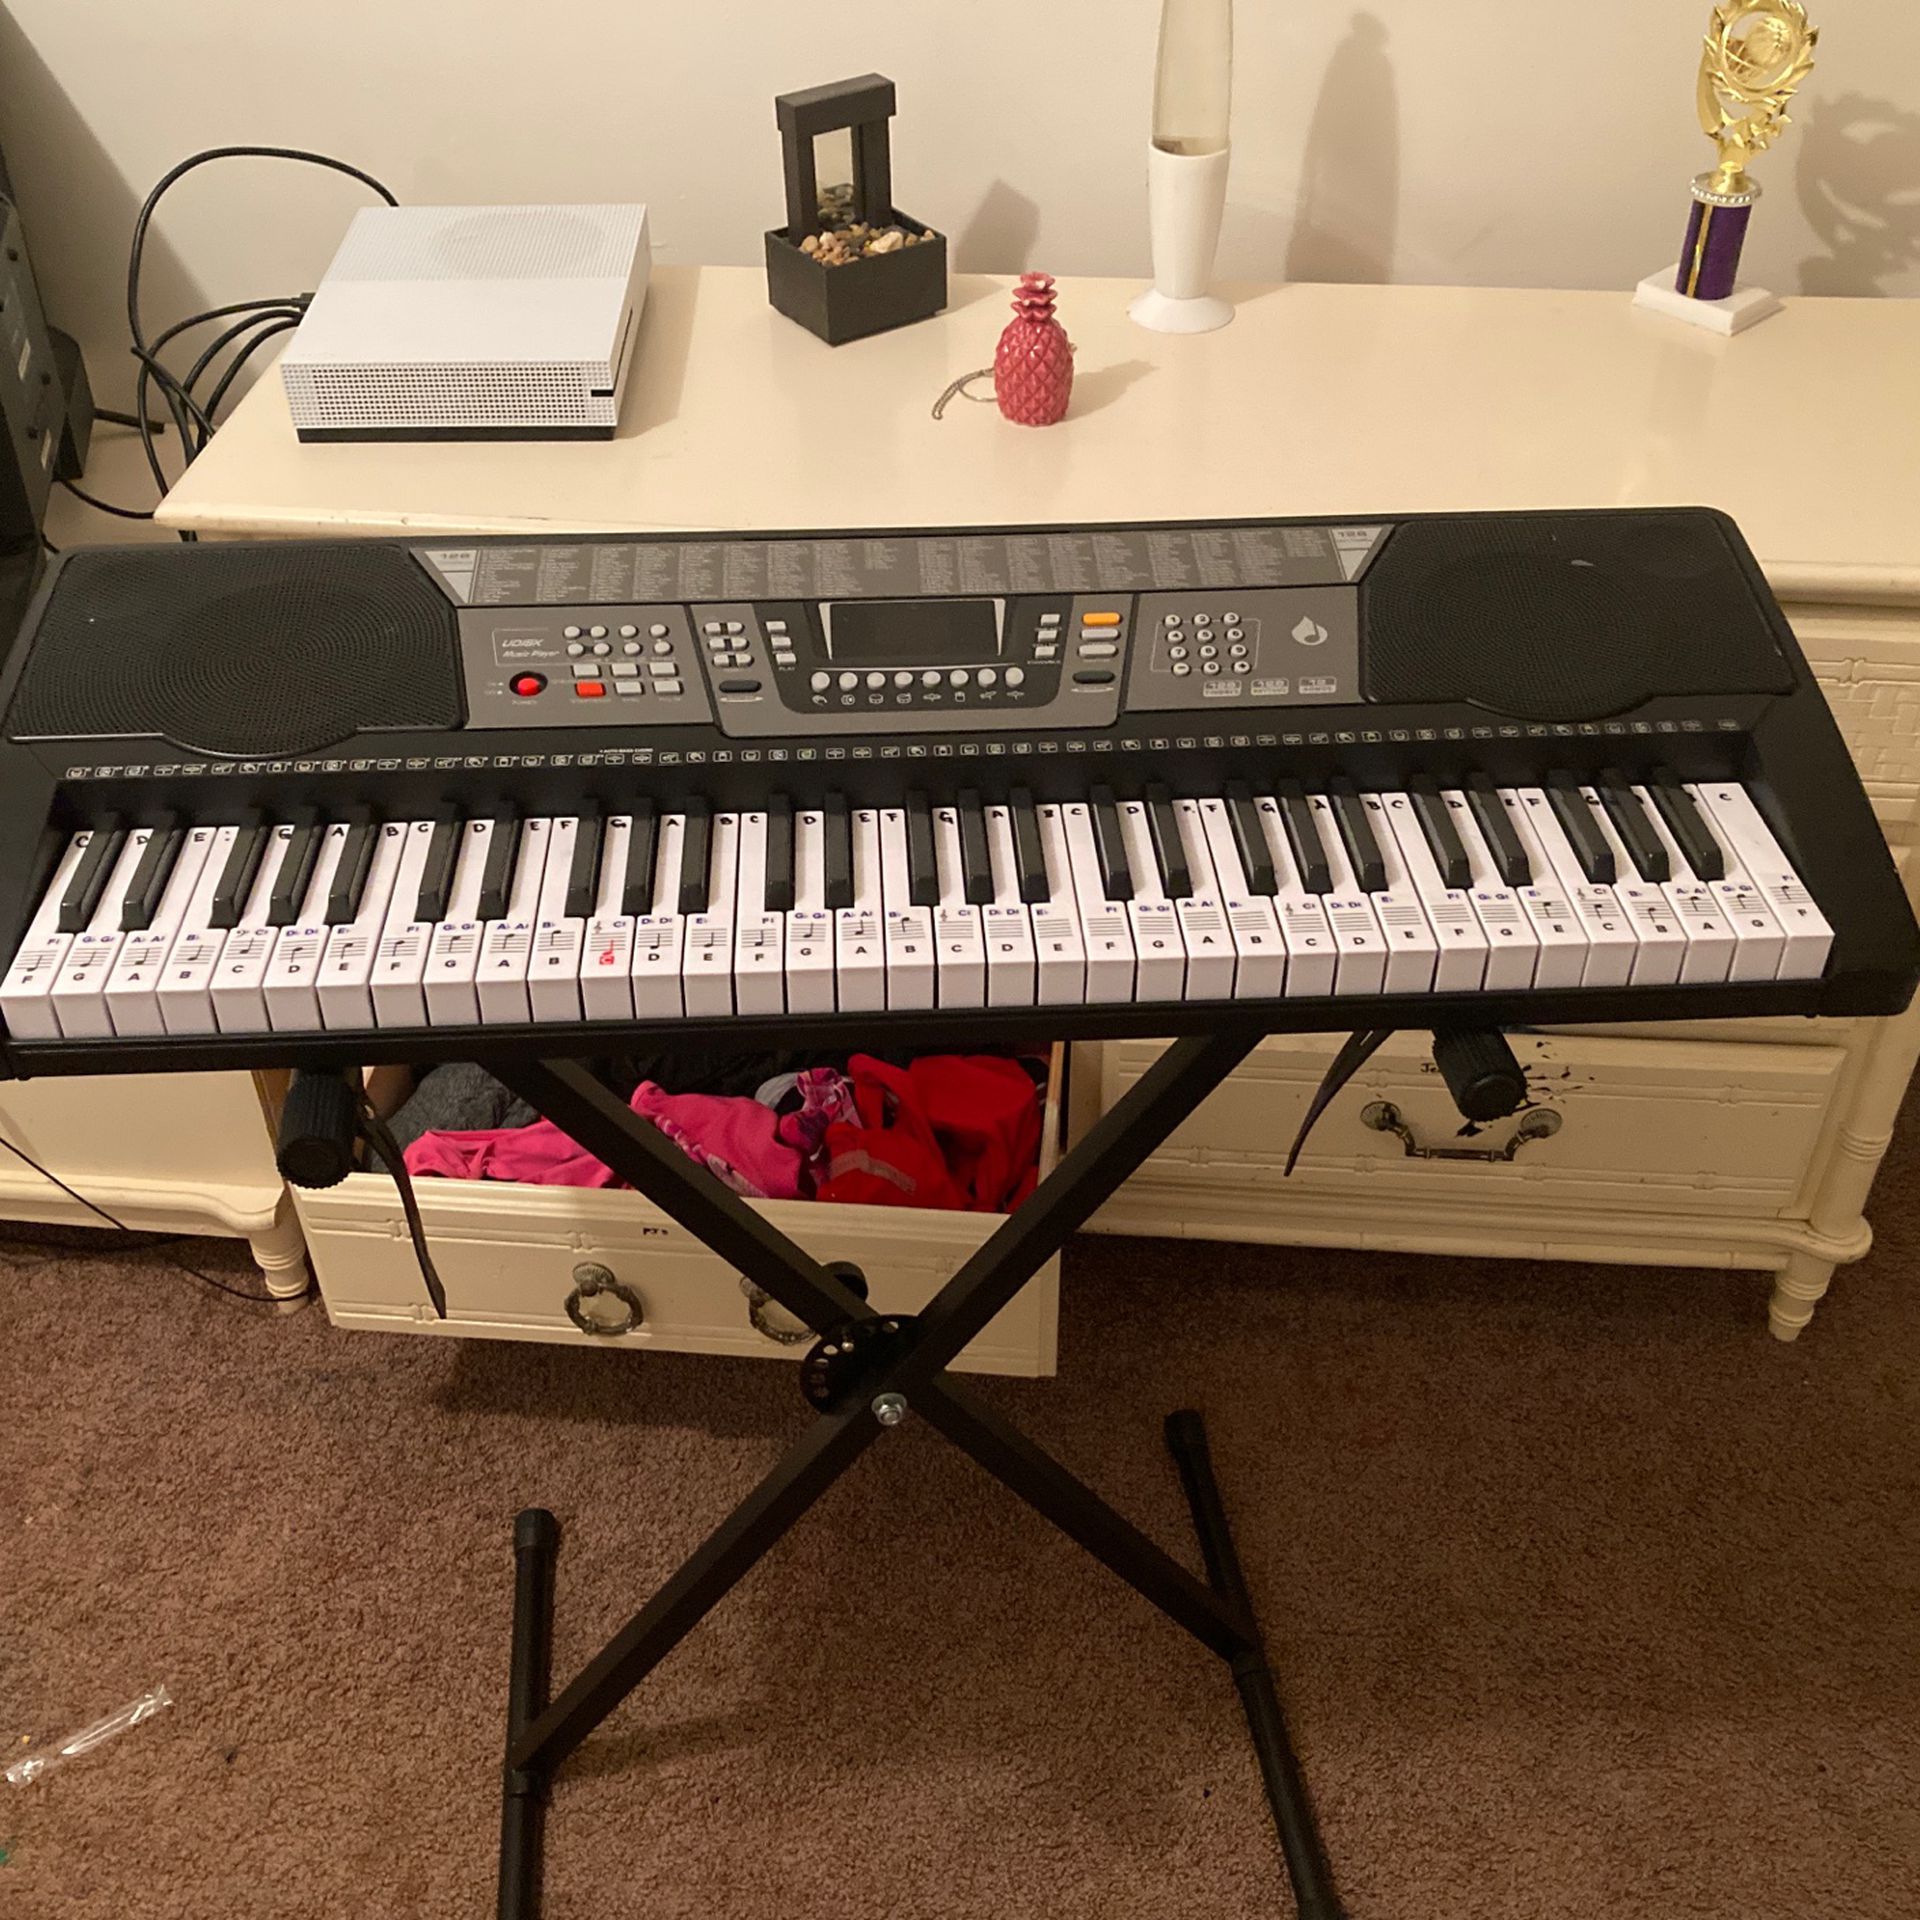 electric Piano for 130 bucks with stand.